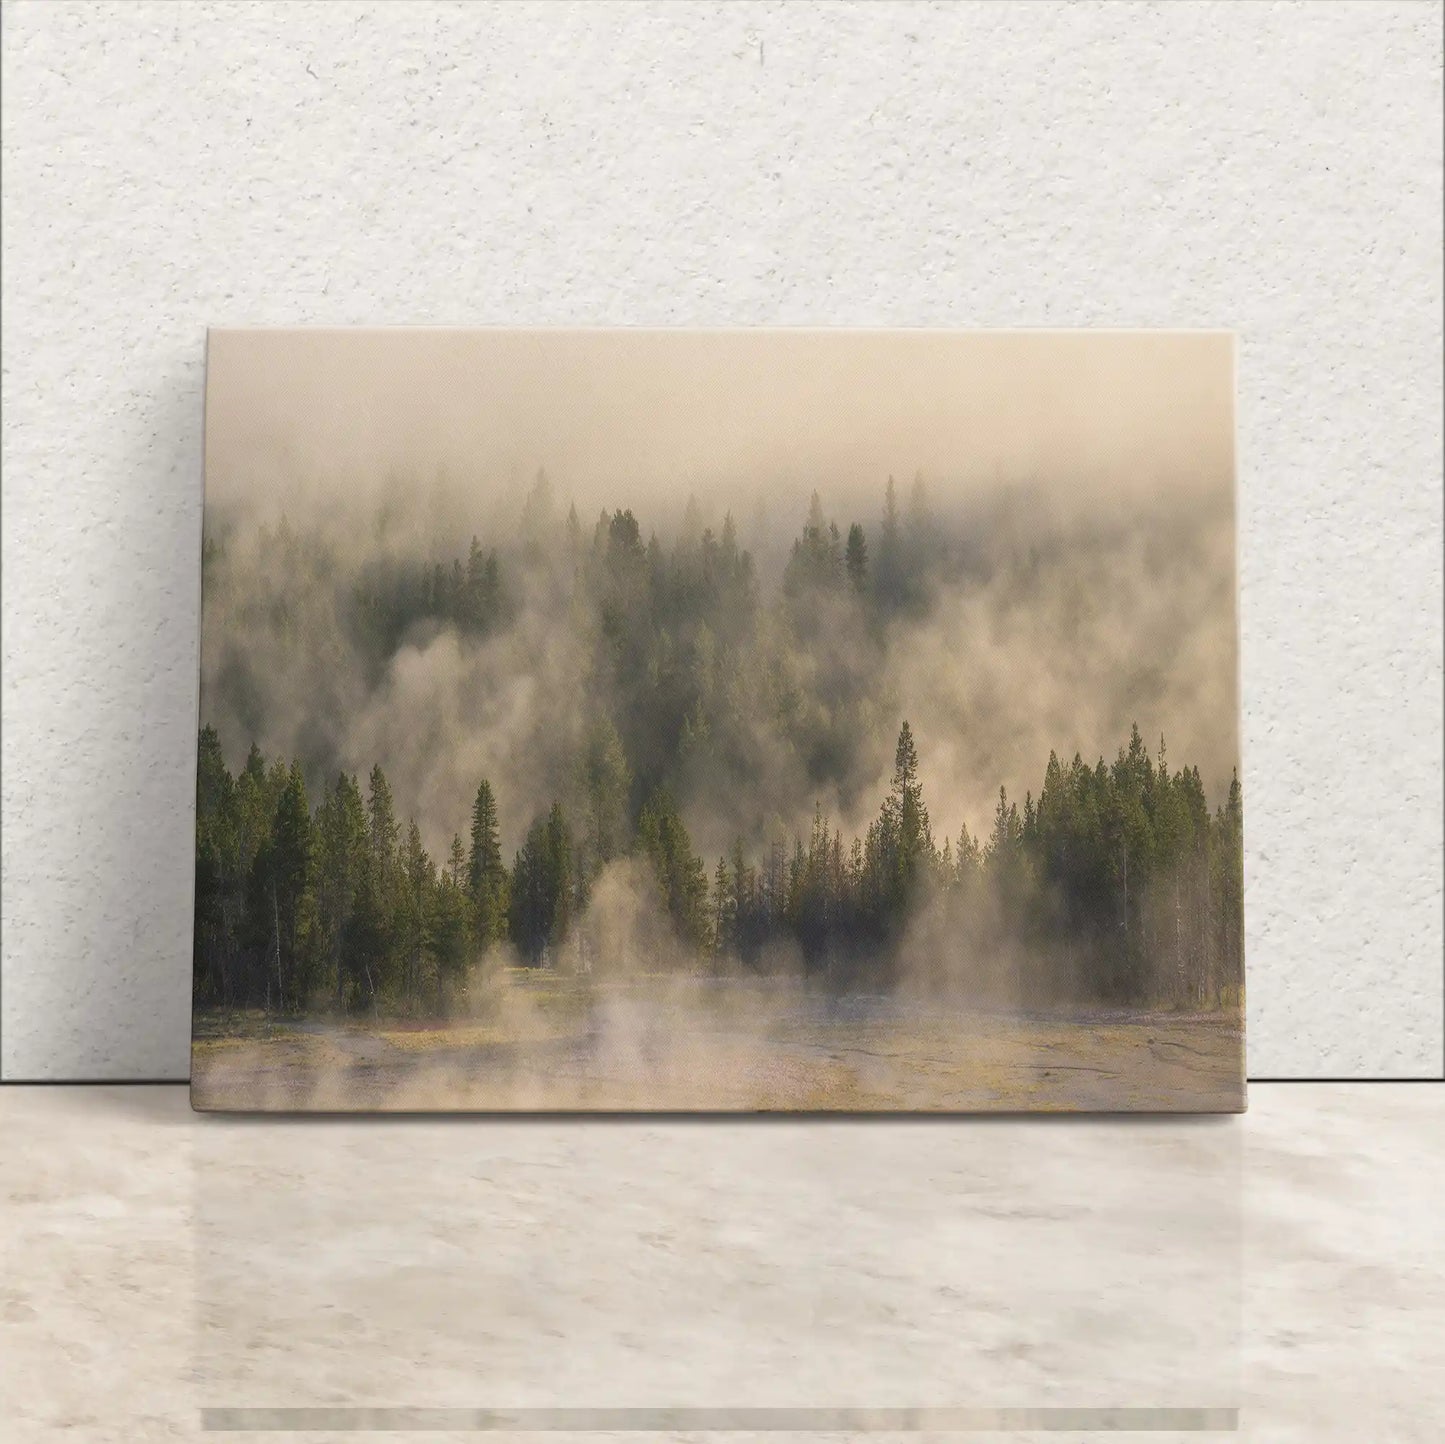 Premium canvas print of Yellowstone's foggy forest, requiring framing, capturing the ethereal beauty of mist among trees